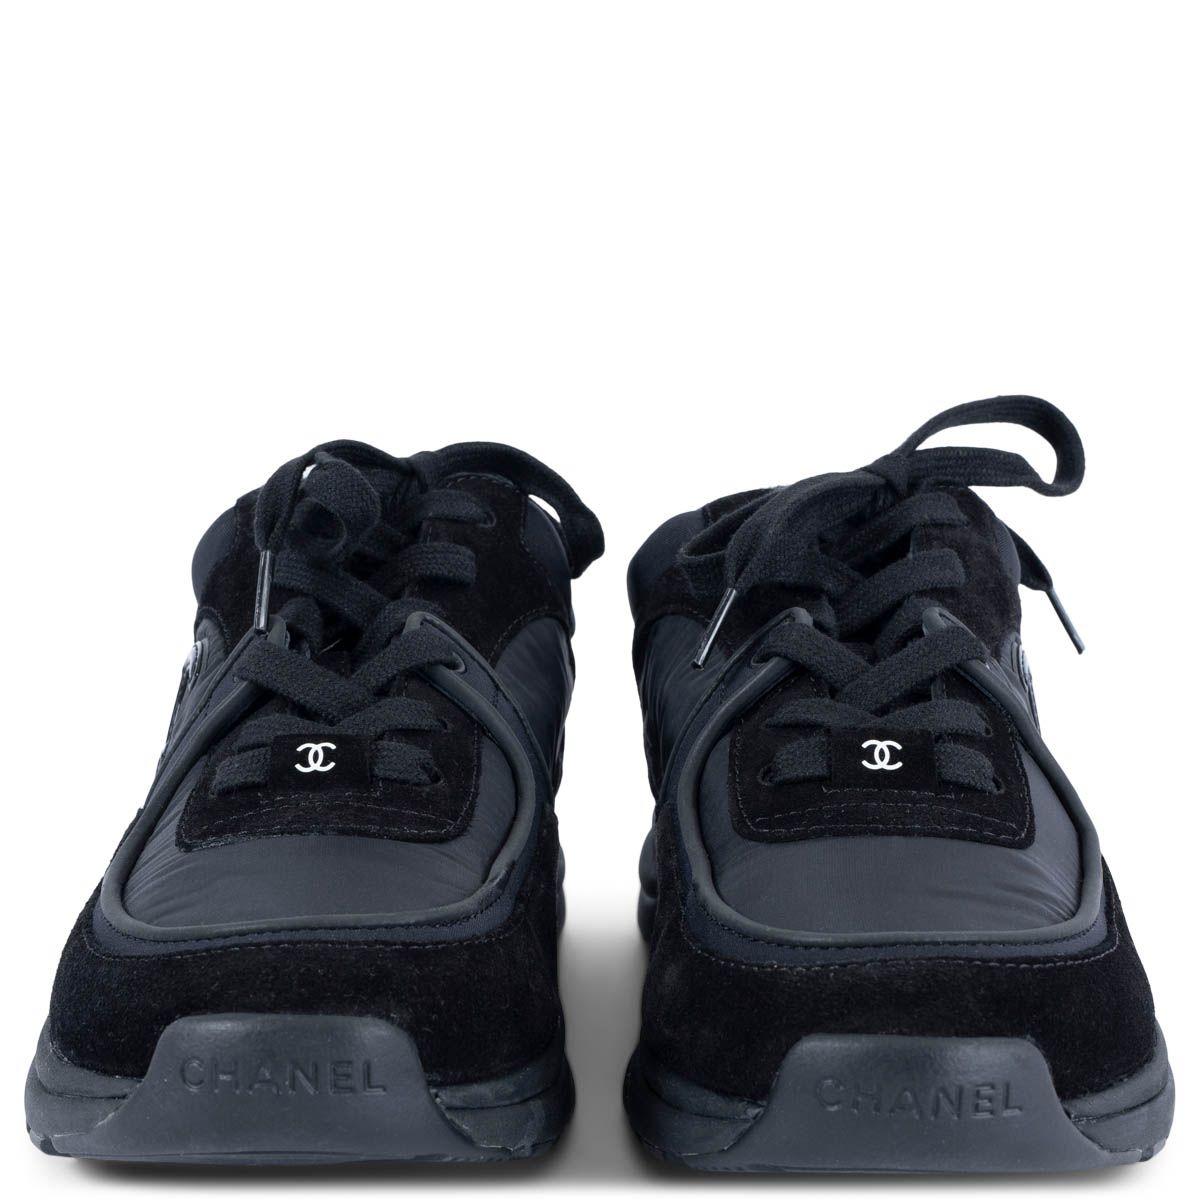 100% authentic Chanel lace-up sneakers in black suede ad nylon. The design features black rubber soles and shiny CC logo on the side. Part of Revolving Collection. Have been worn once or twice and are in virtually new condition.